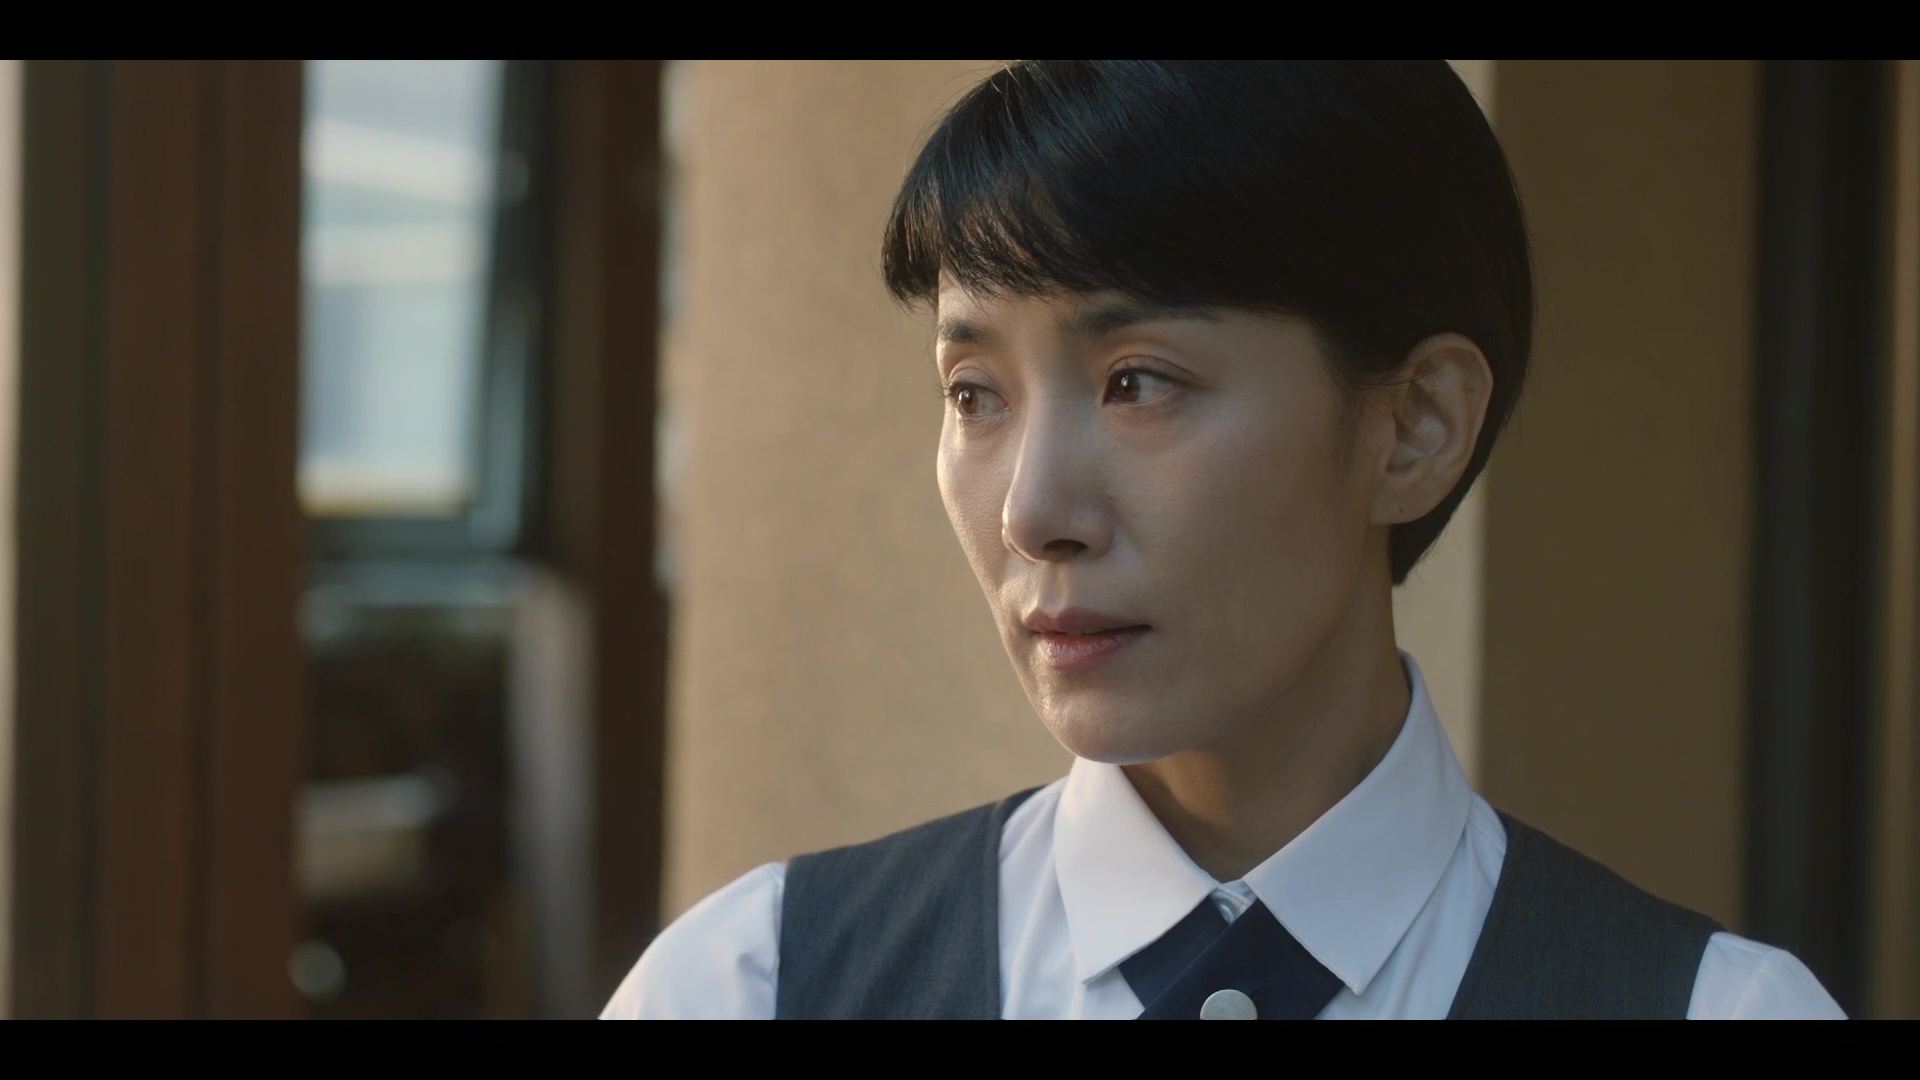 Paper Moon: Episode 1 (First Impressions)